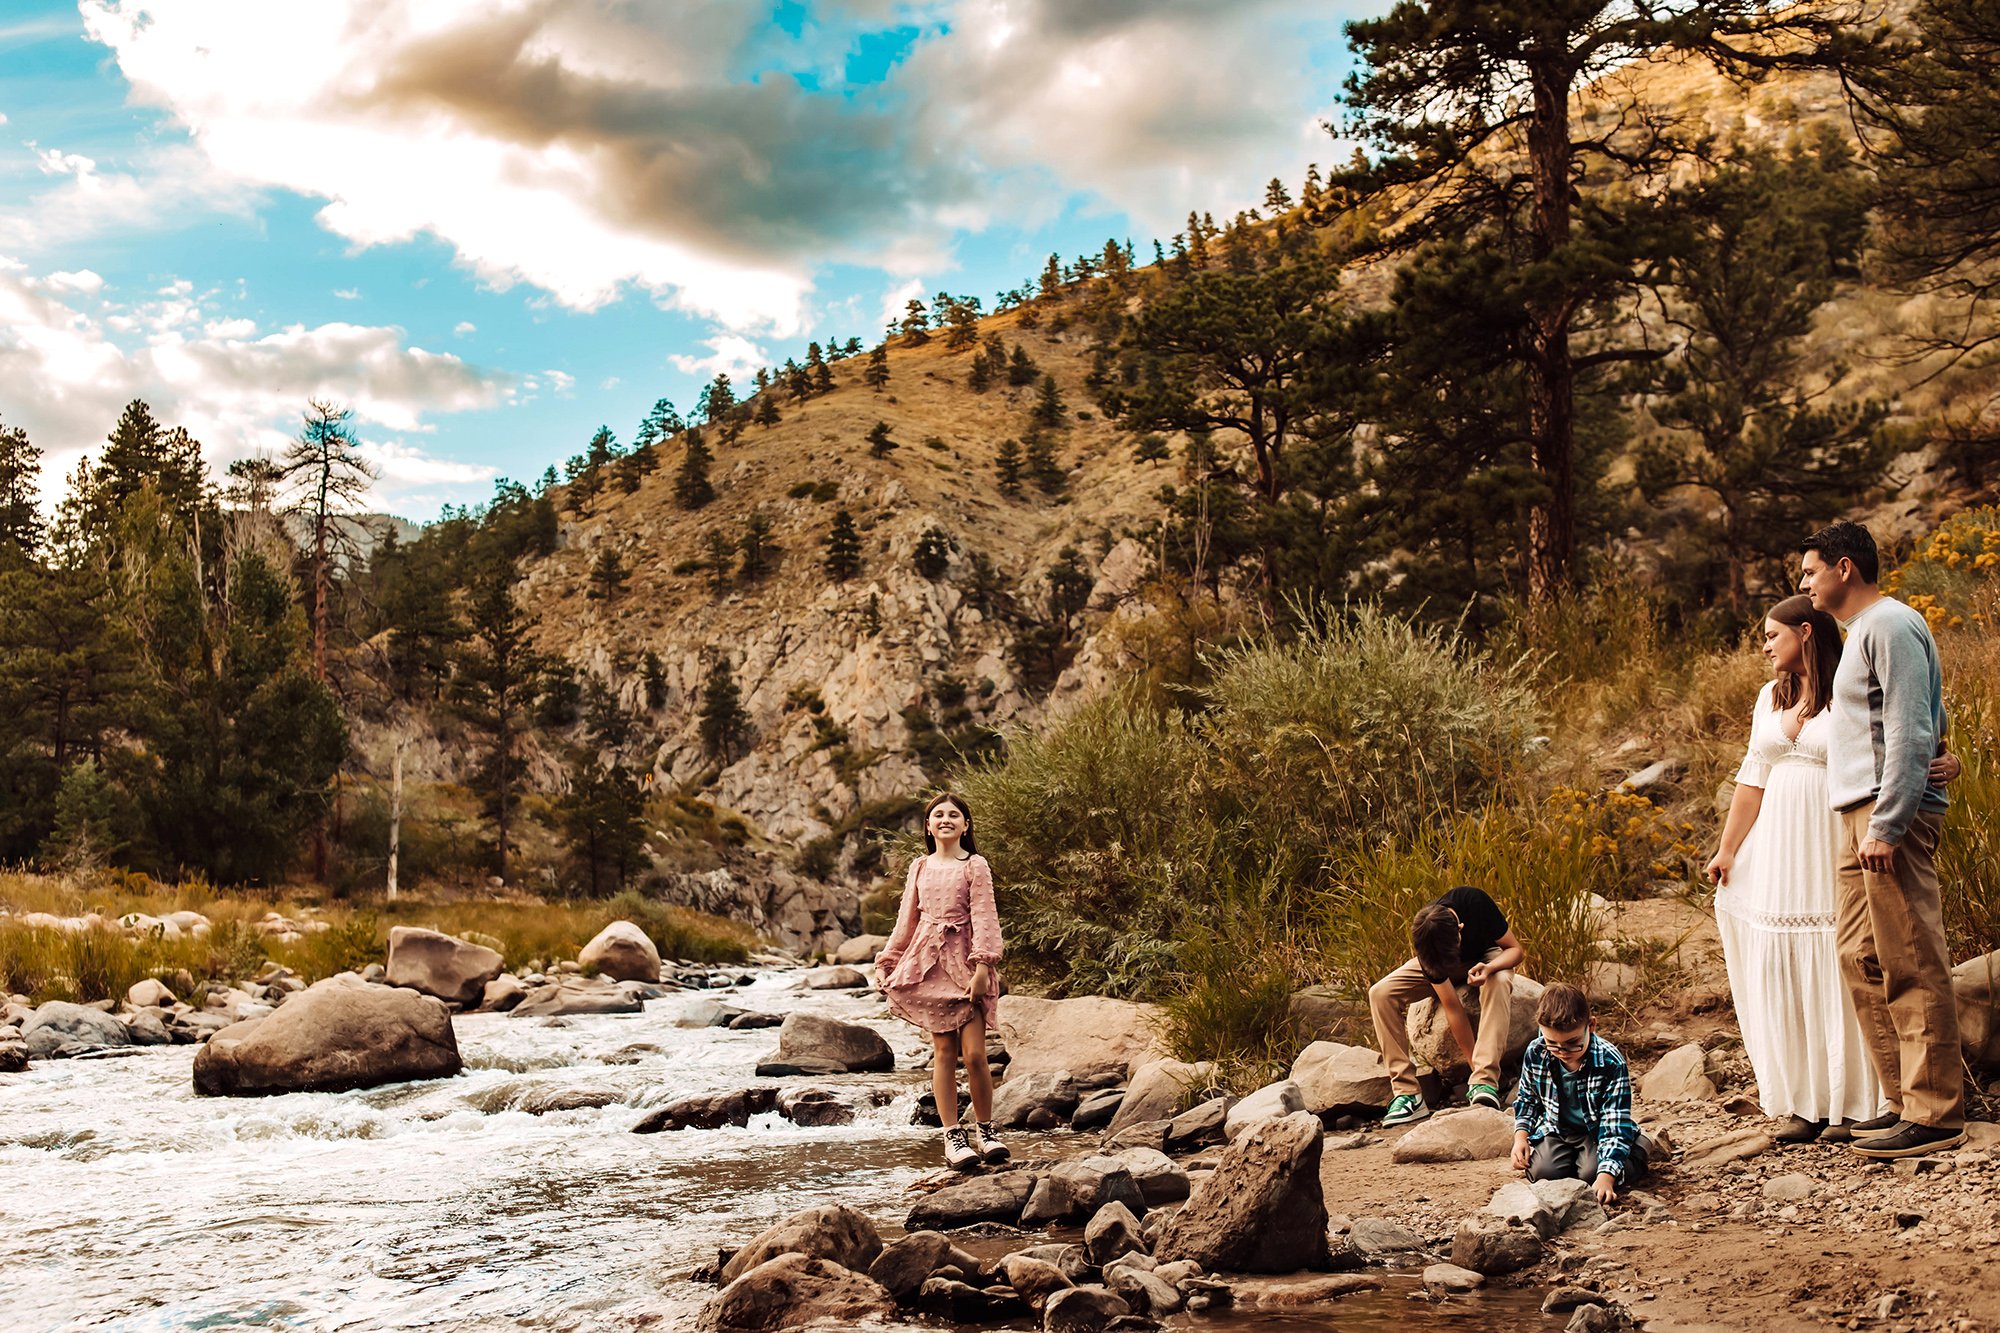 Family time at the river on a fall day in Loveland, Colorado.